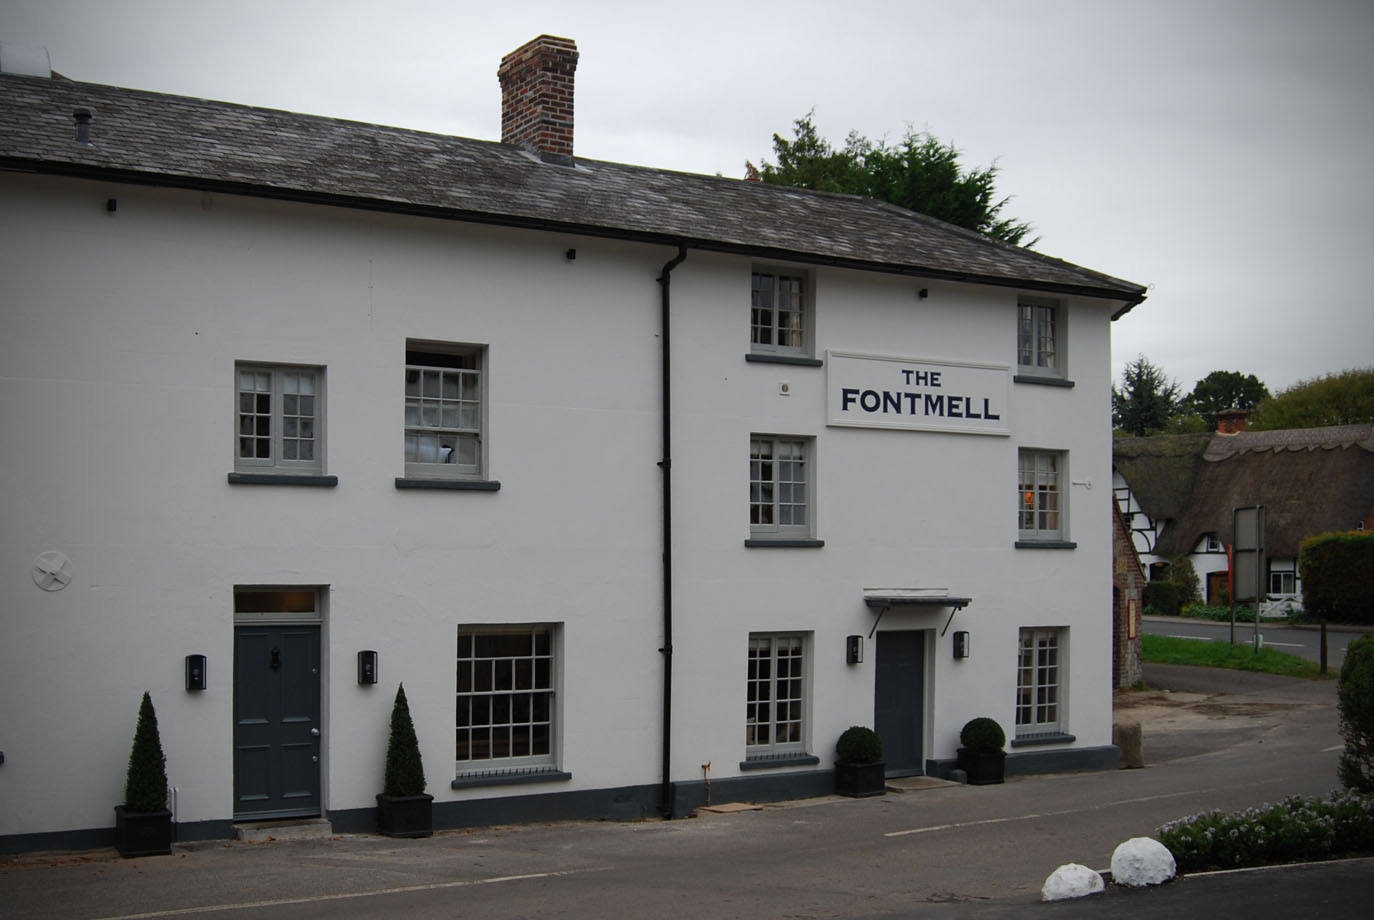 THE FONTMELL, FONTMELL MAGNA